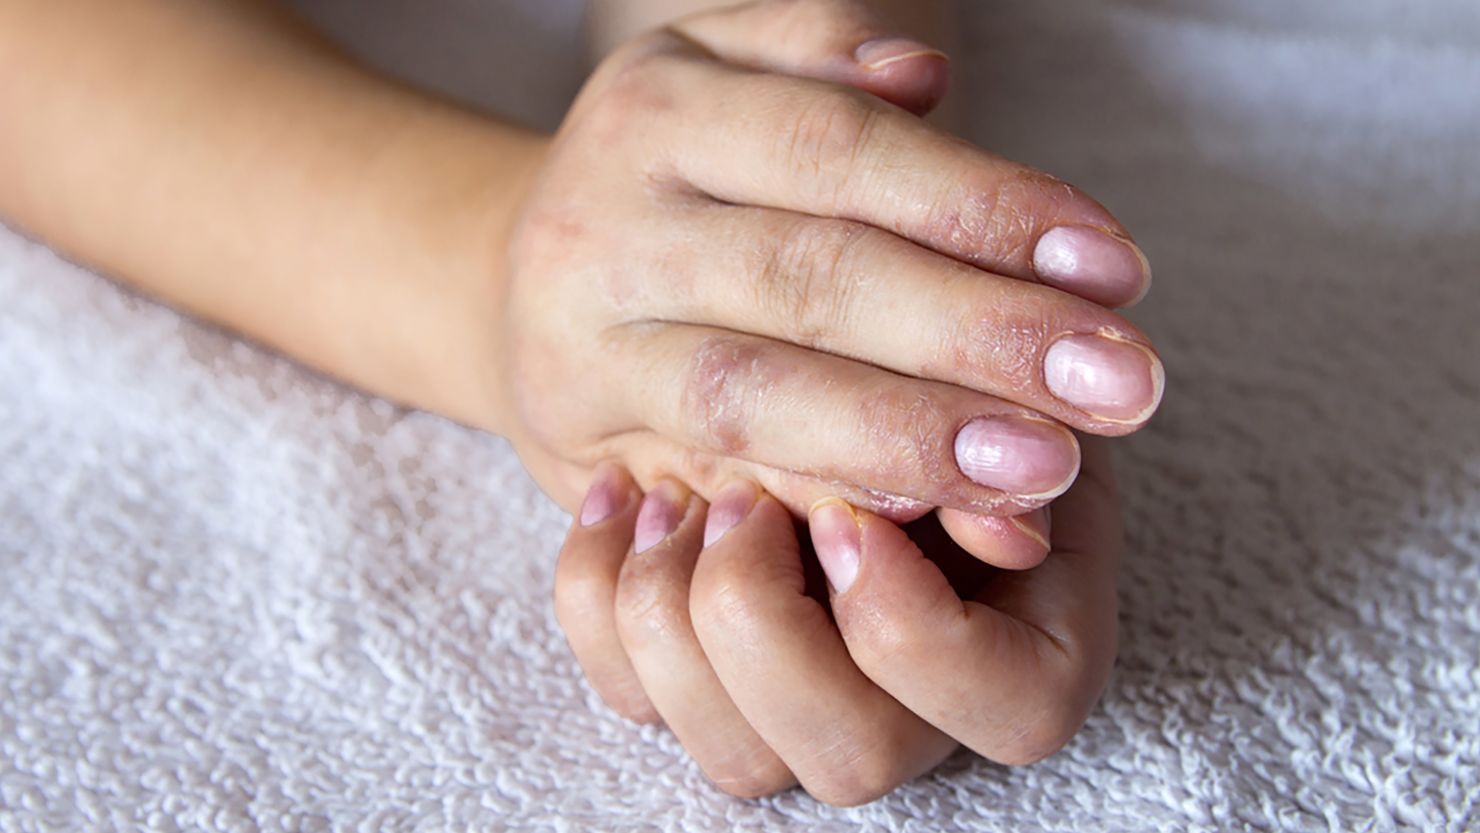 Eczema affects 18 million adults and 9.6 million children in the United States, researchers said.